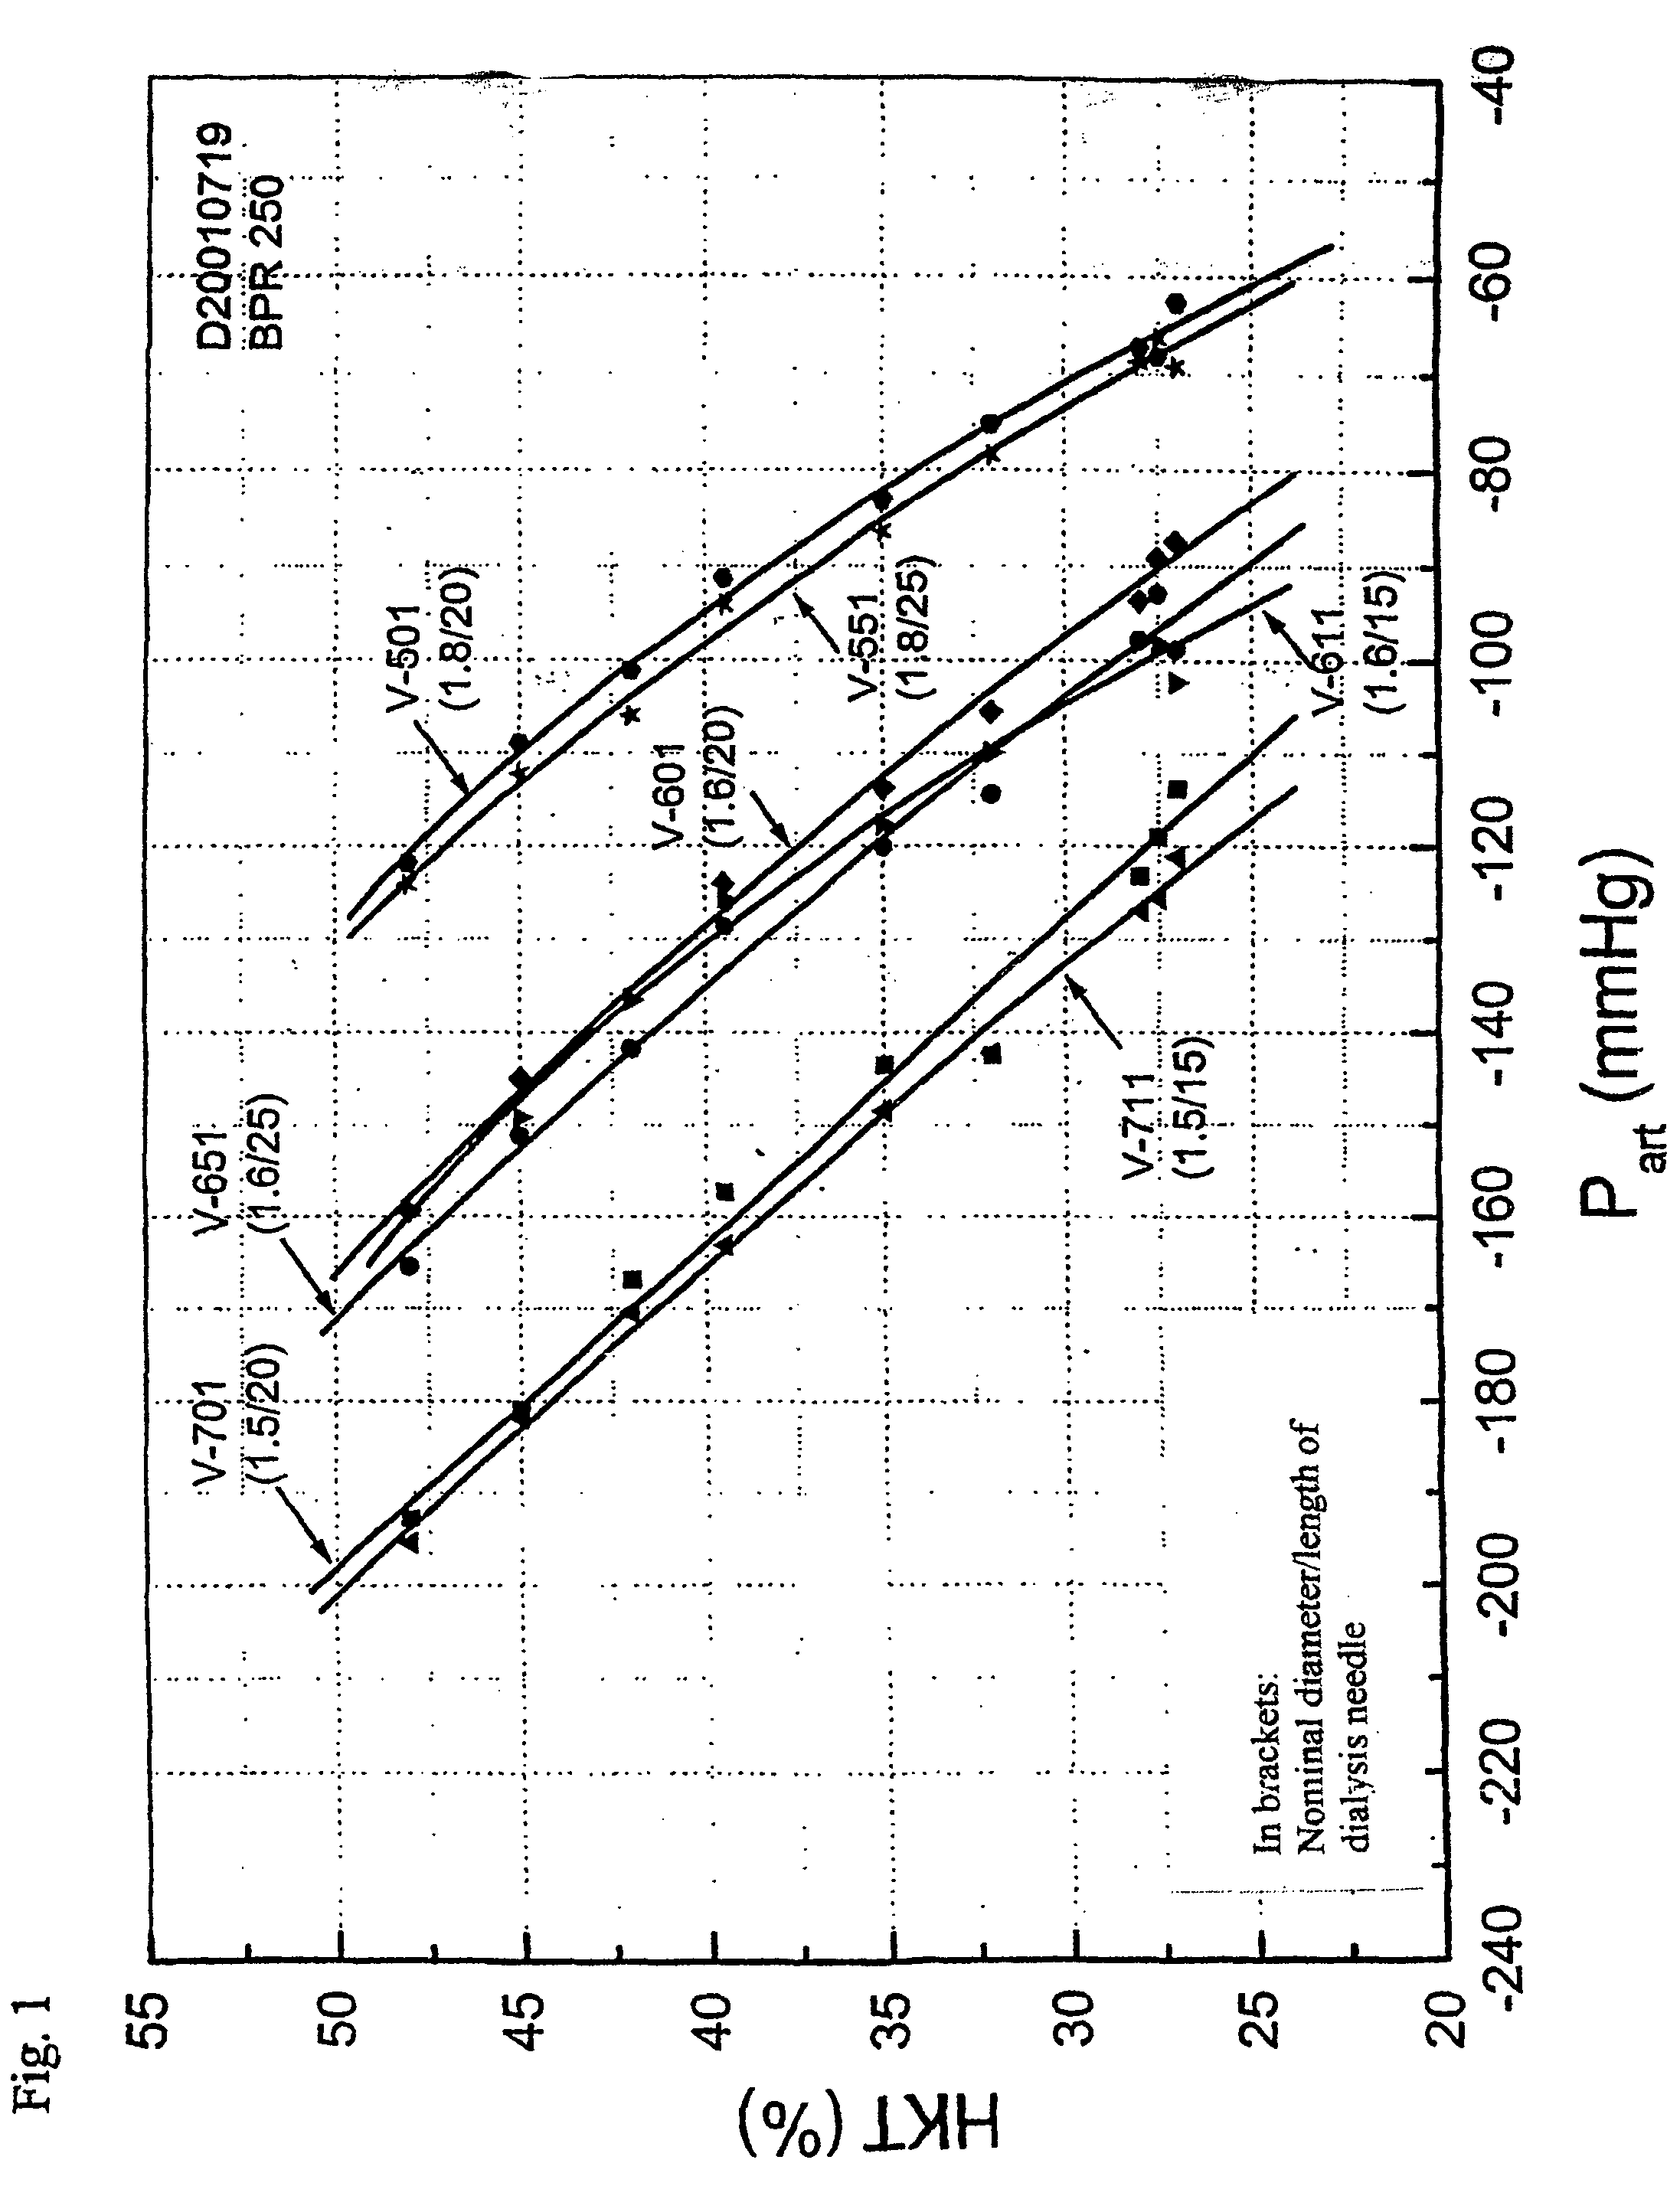 System and method for determining the hematocrit and/or blood volume